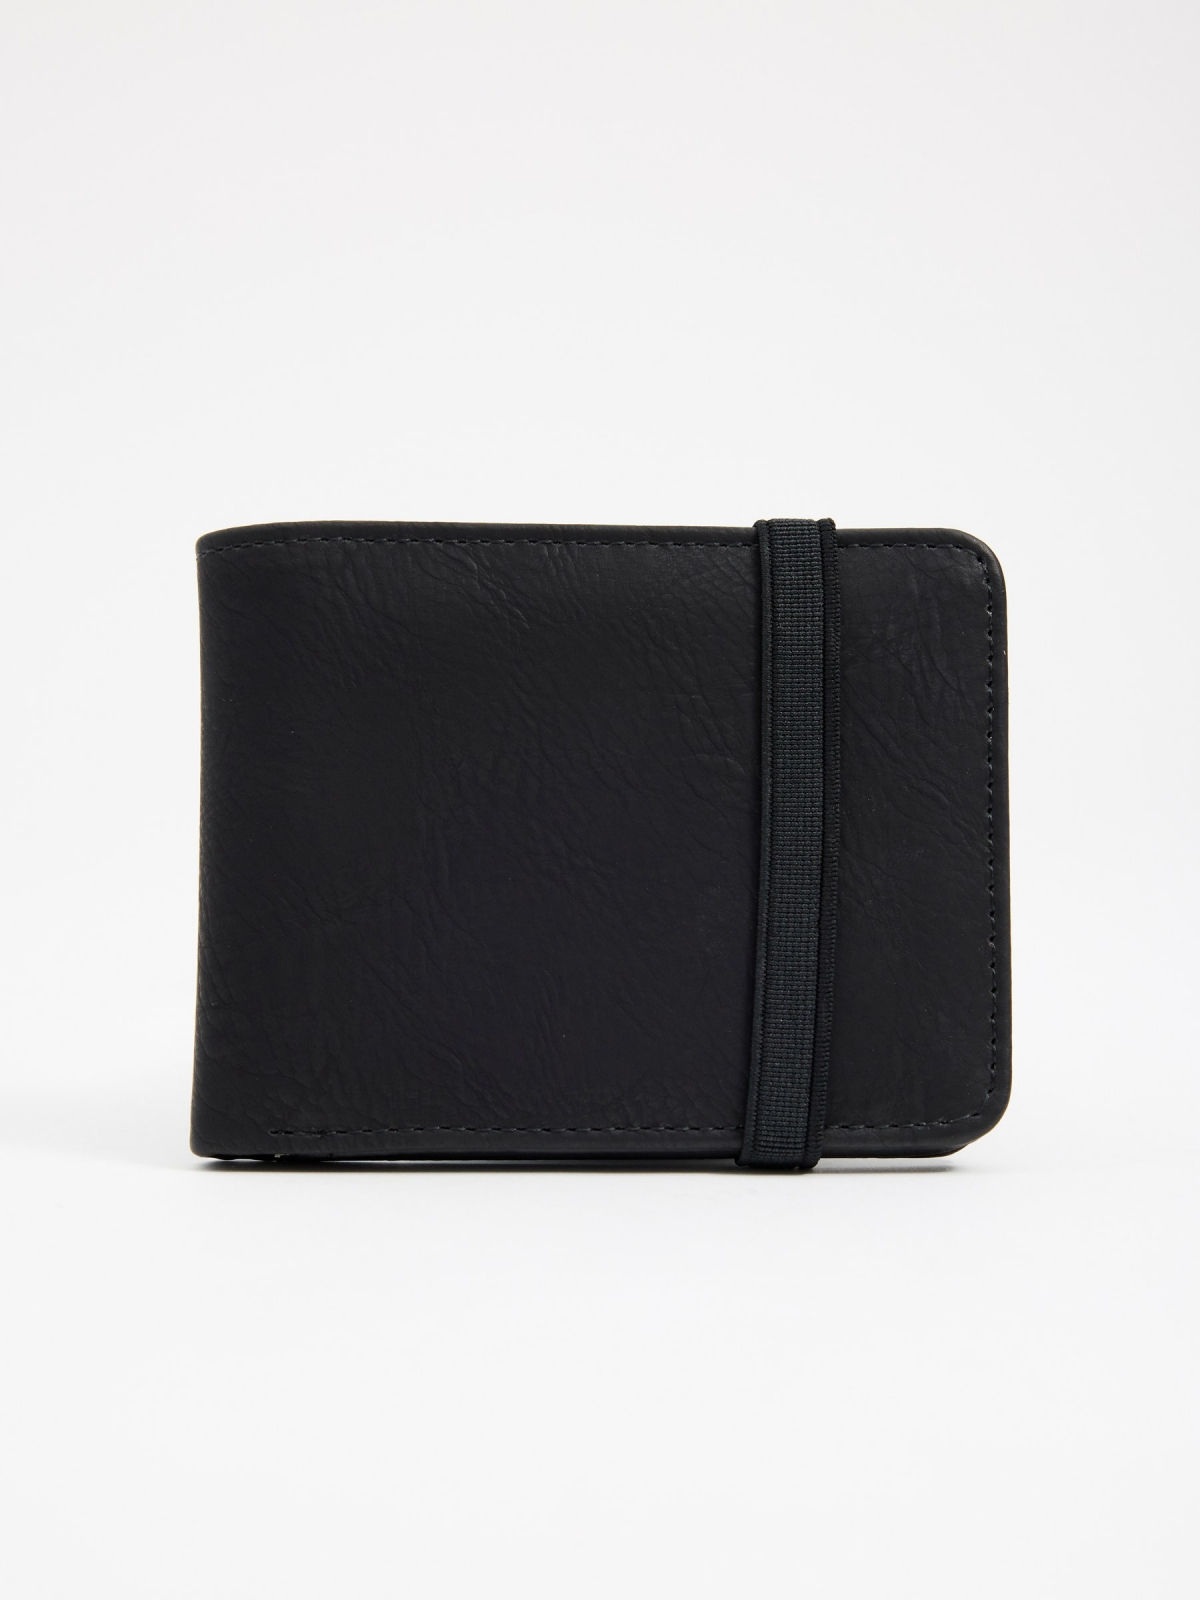 Leather effect wallet with elastic closure black